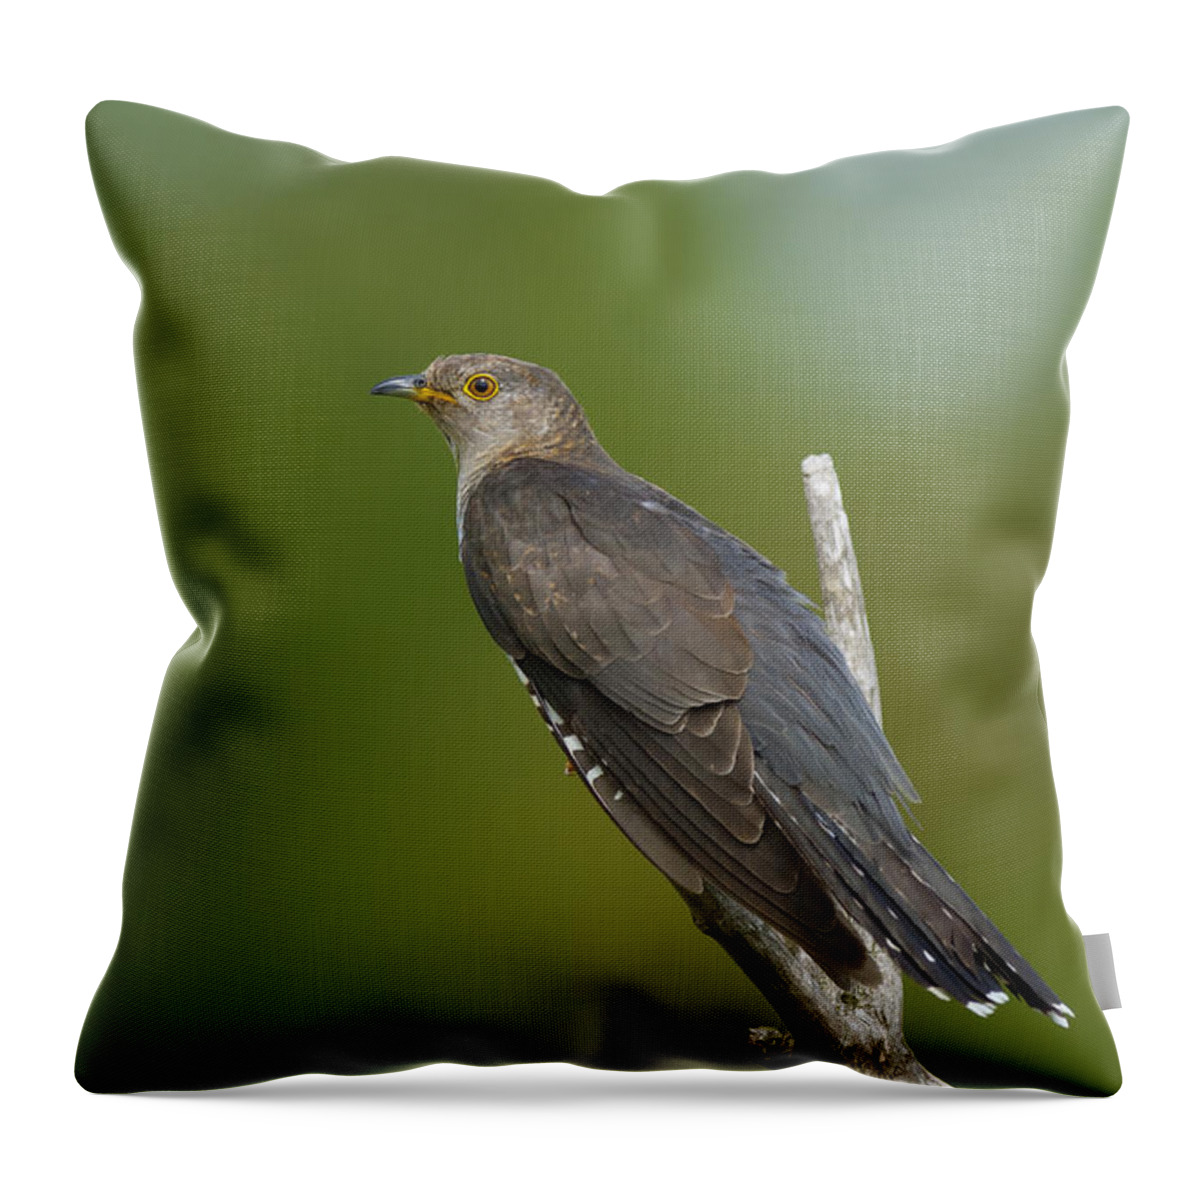 Common Cuckoo Throw Pillow featuring the photograph Common Cuckoo by Steen Drozd Lund